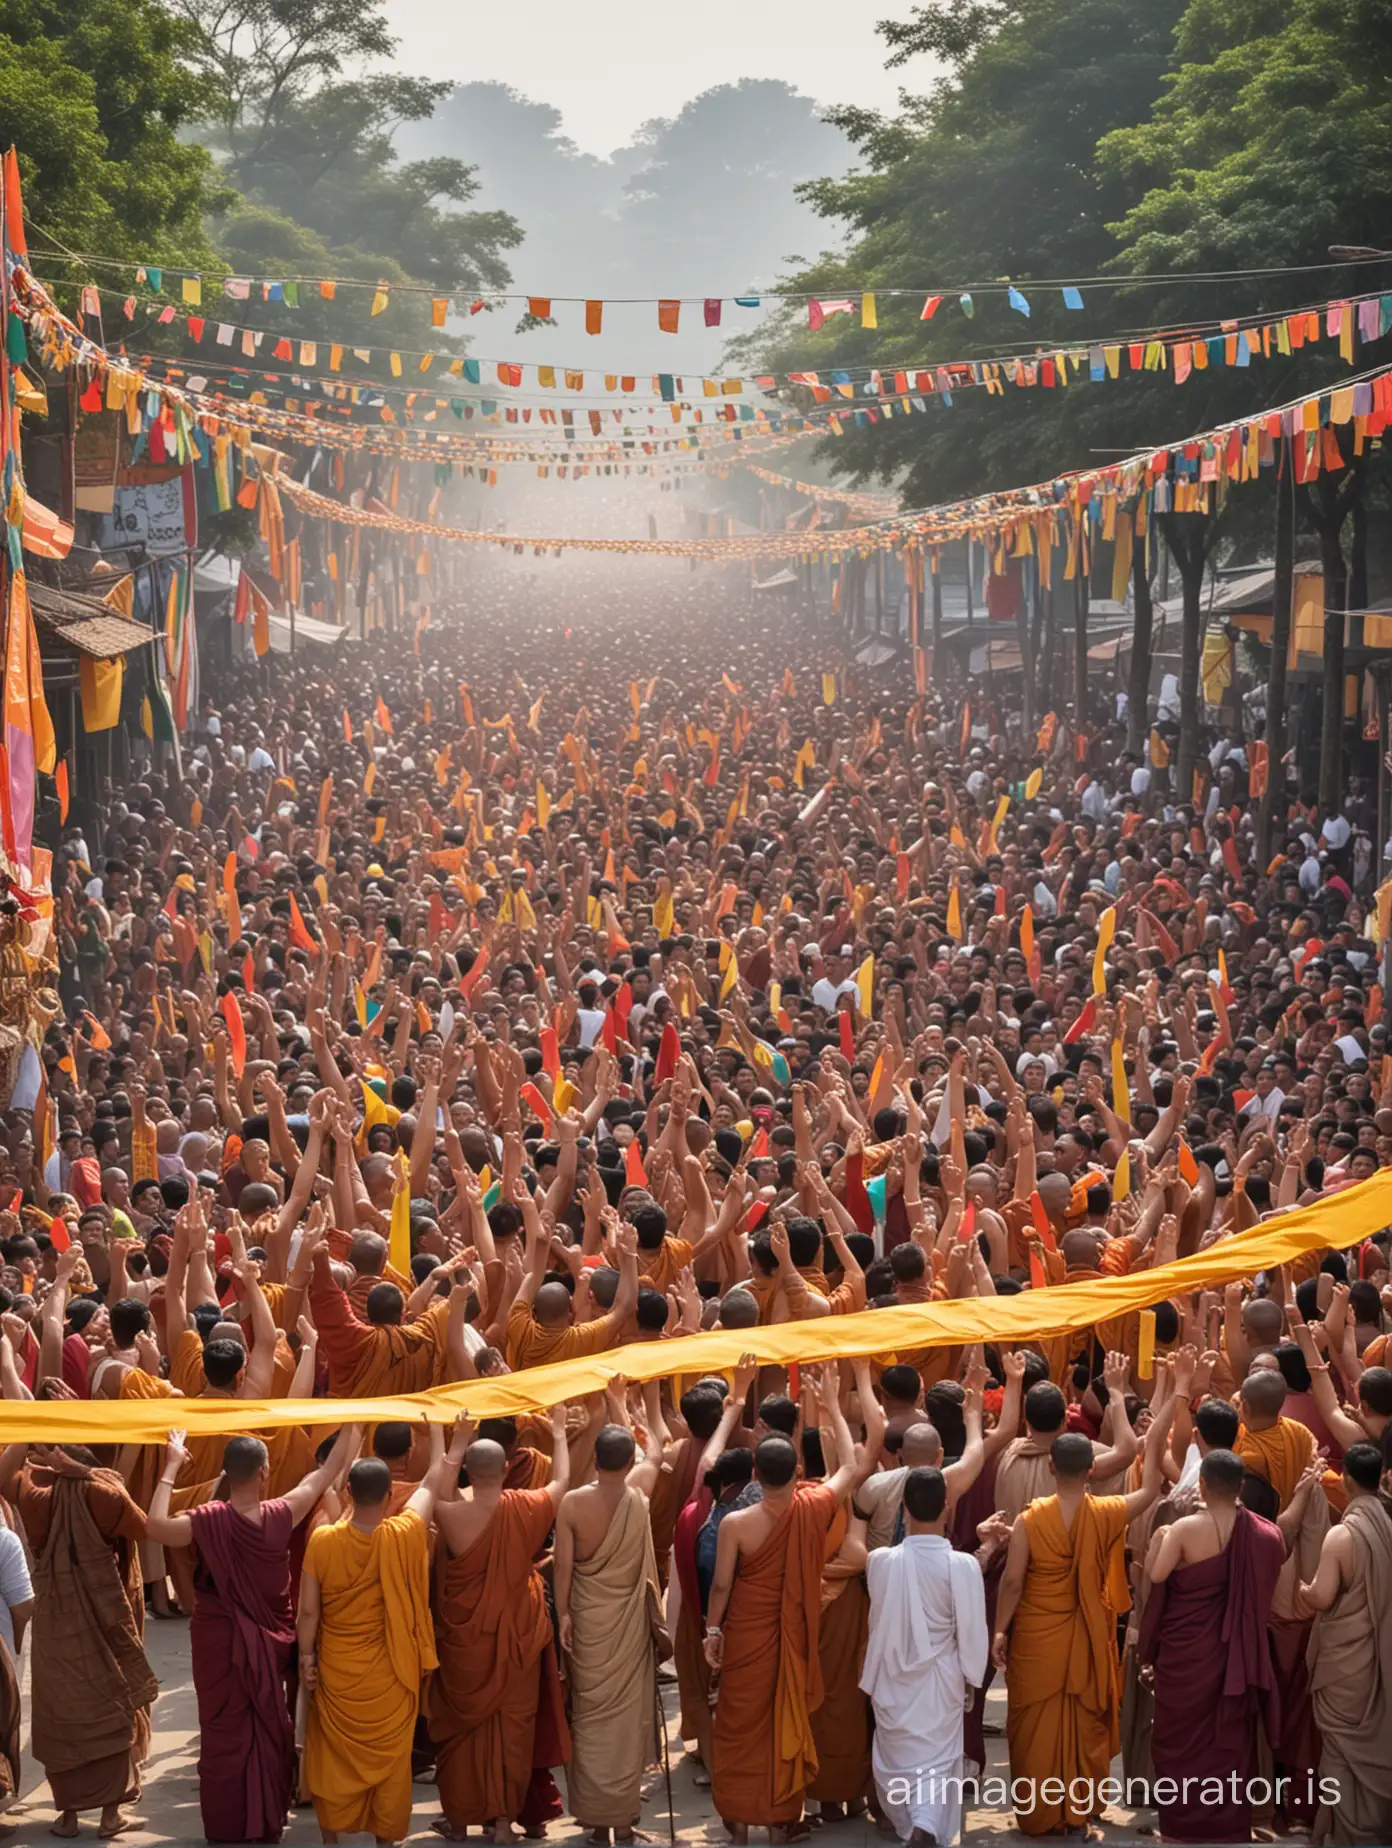 Show scenes of celebration in the kingdom as news of Siddhartha Gautama's future Buddha's birth spreads, with colorful banners and joyful faces capturing the excitement of the moment